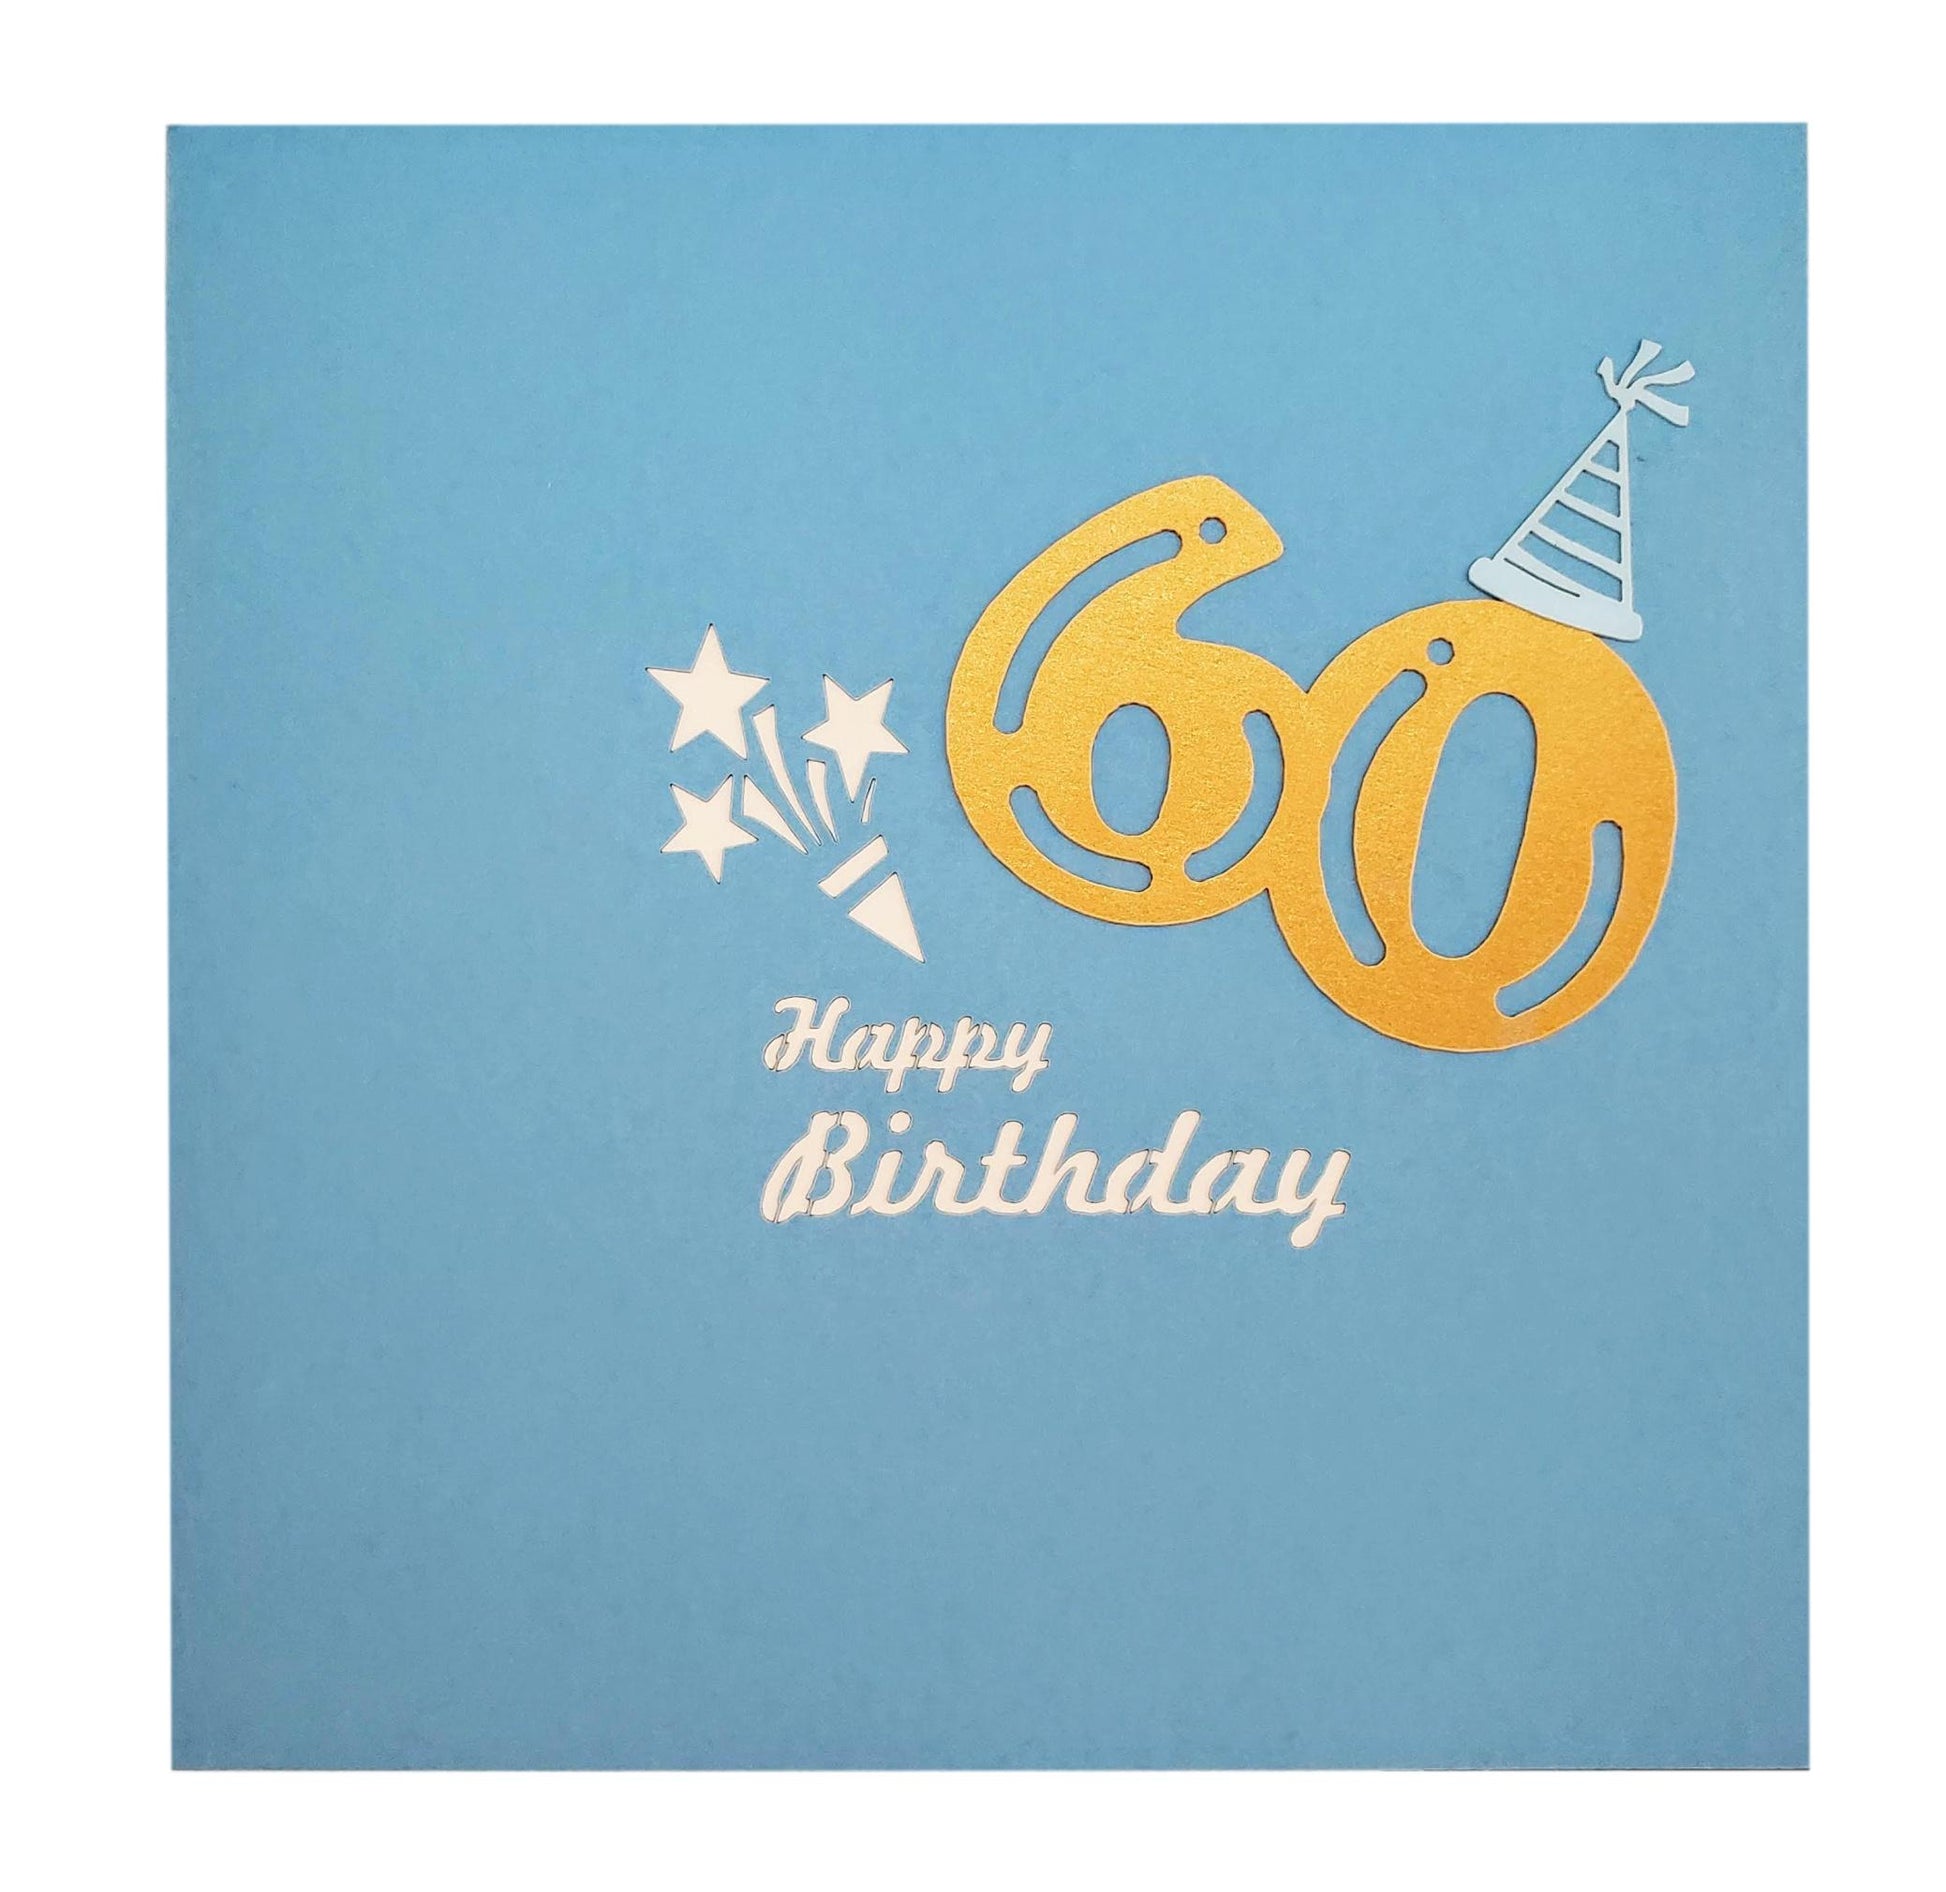 Happy 60th Birthday Blue Party Box 3D Pop Up Greeting Card - Age - Birthday - Fun - Special Days - iGifts And Cards